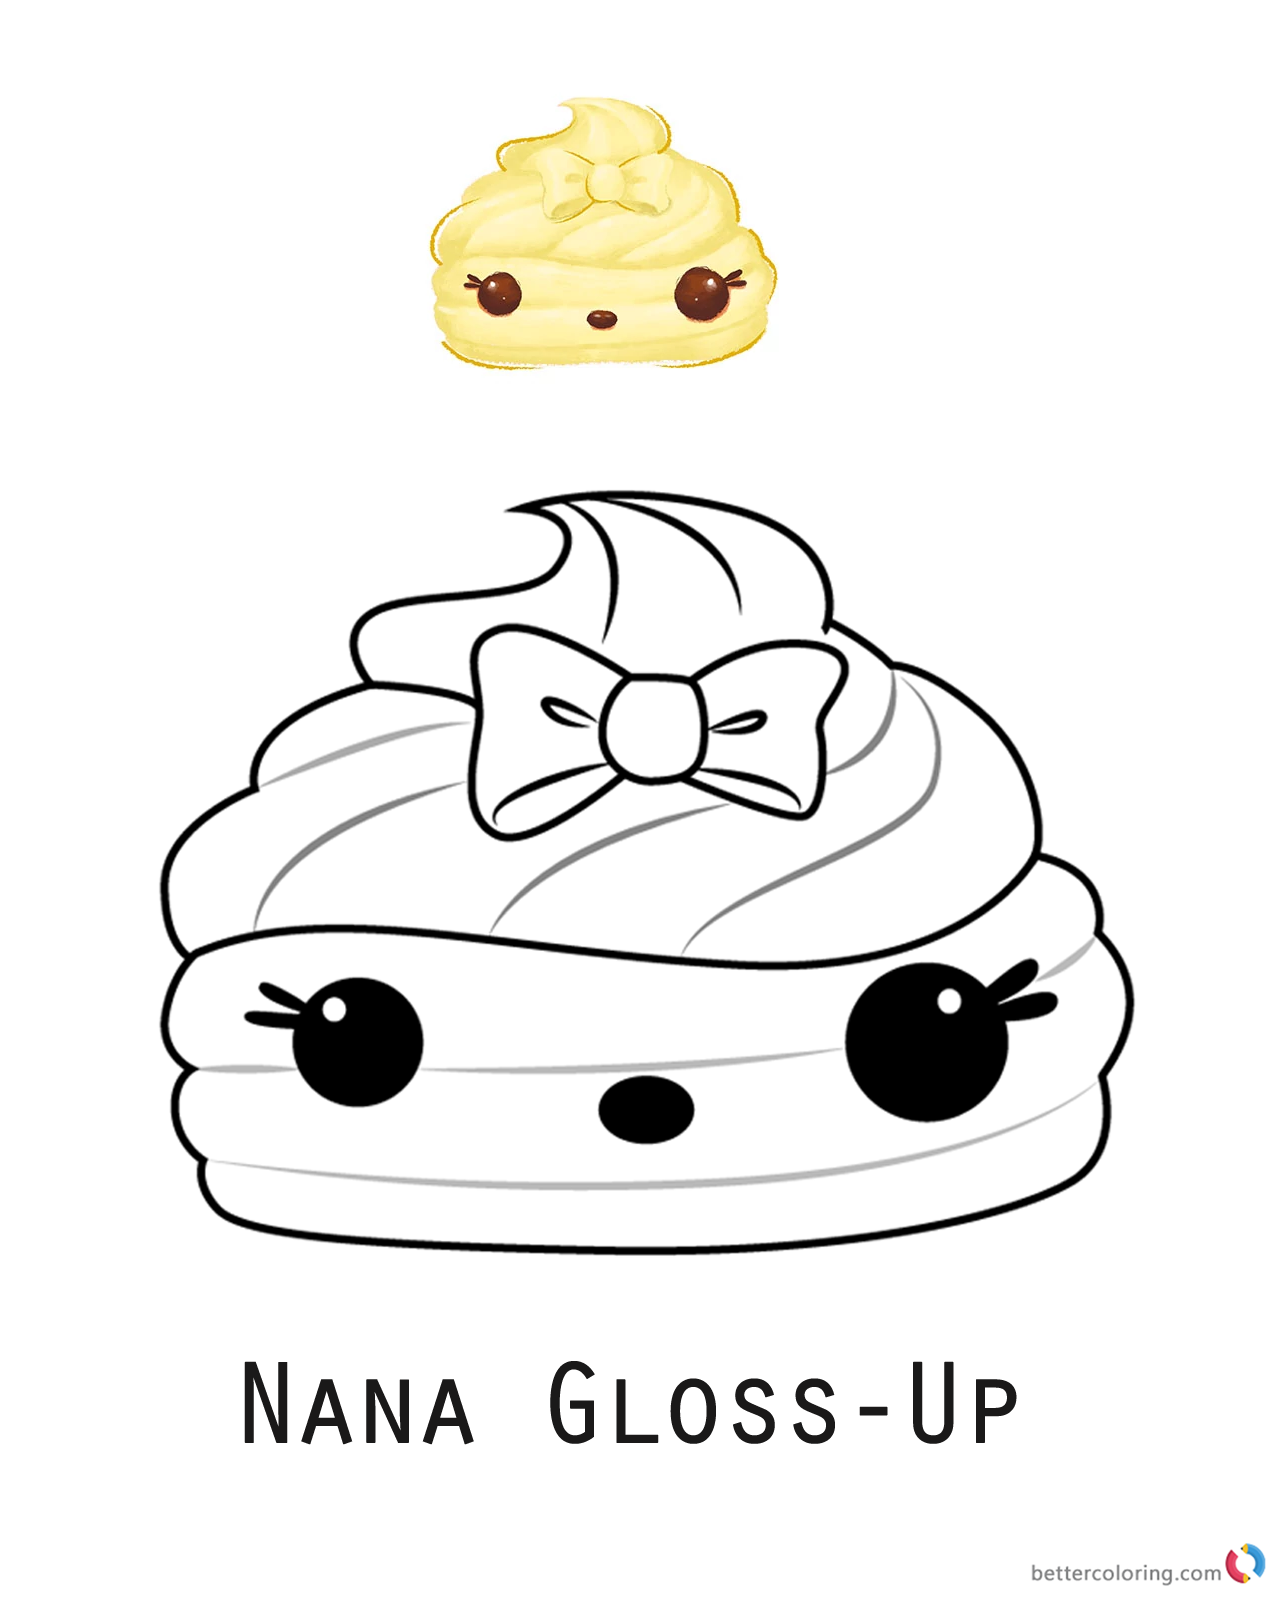 Nana Gloss-Up from Num Noms coloring pages printable